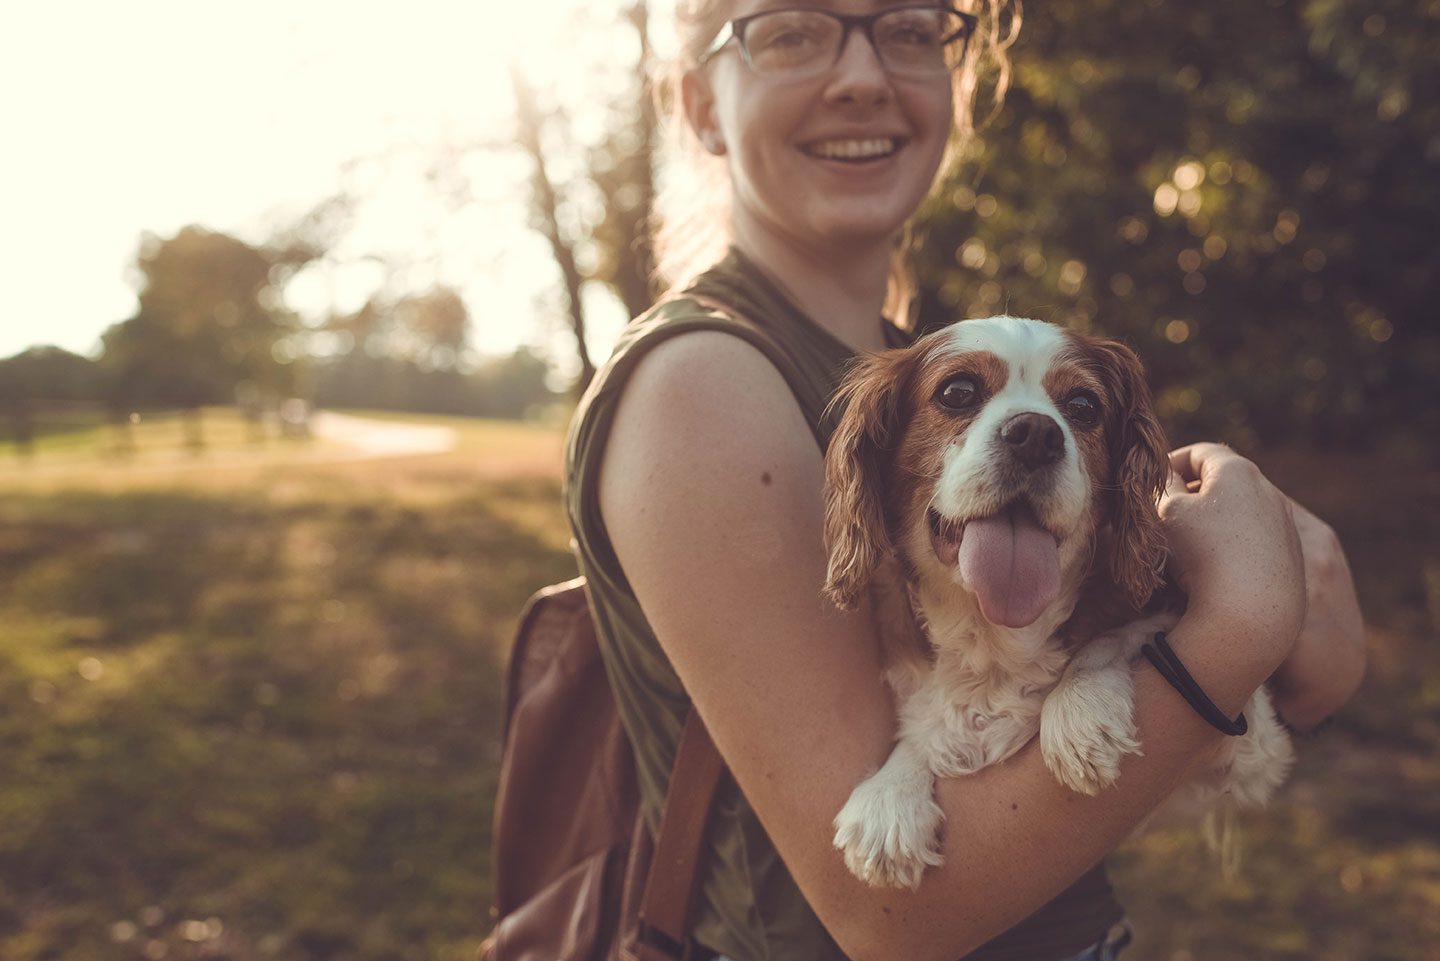 Young girl with glasses and backpack holding a small dog filtered sunlight Fear and anxiety